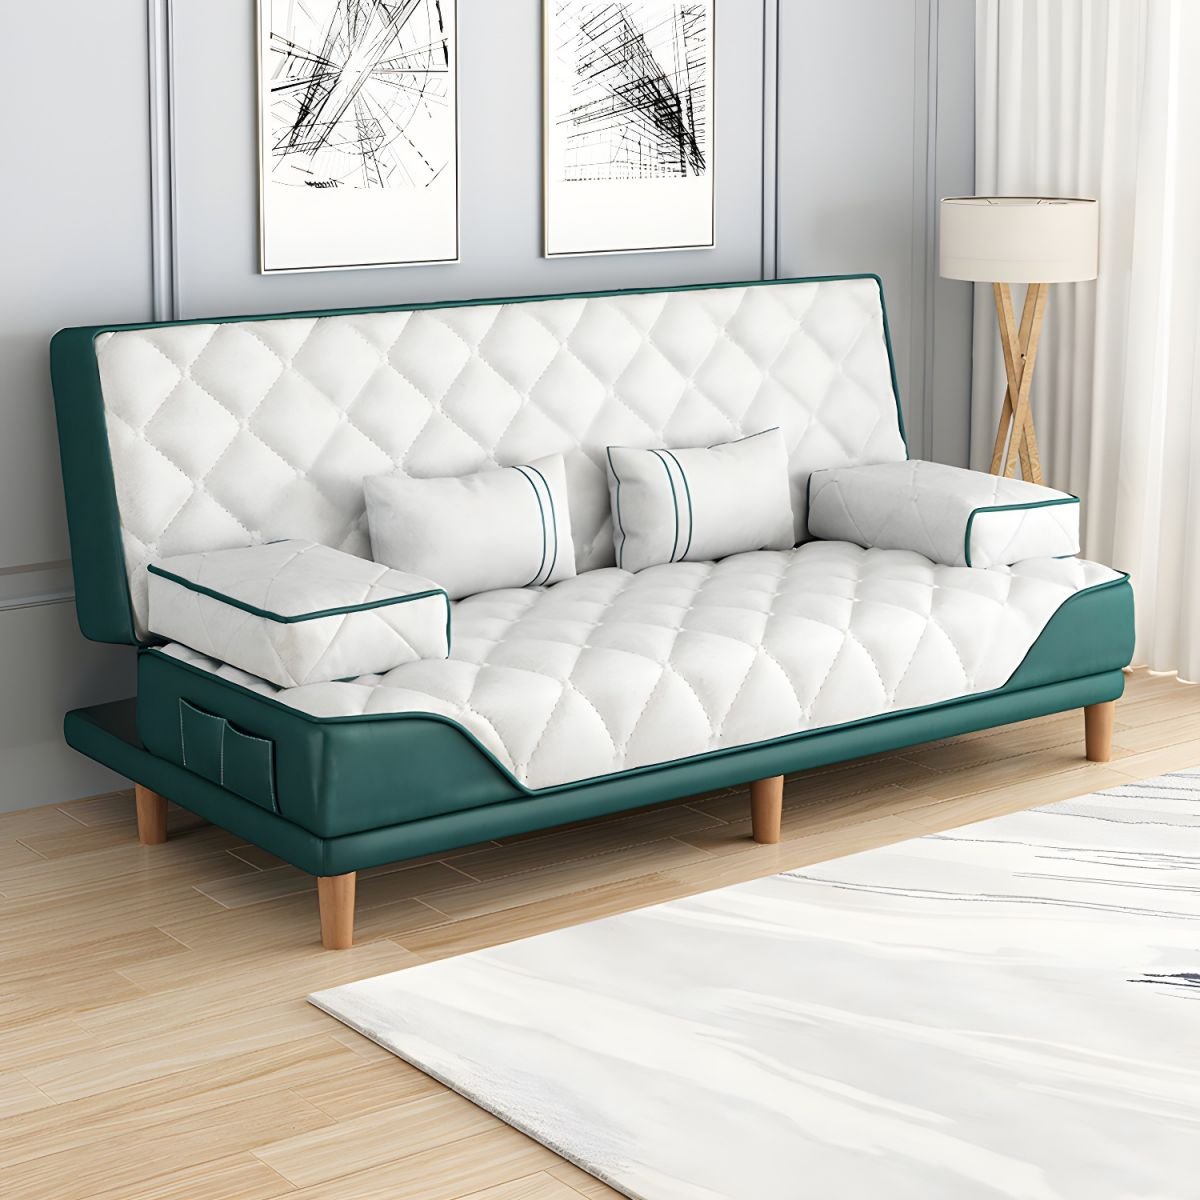 Contemporary Tight Back Convertible Sofa and Chaise with Pillow Top Arm - 47"L x 30"W x 34"H Atrovirens/ White Tech Cloth